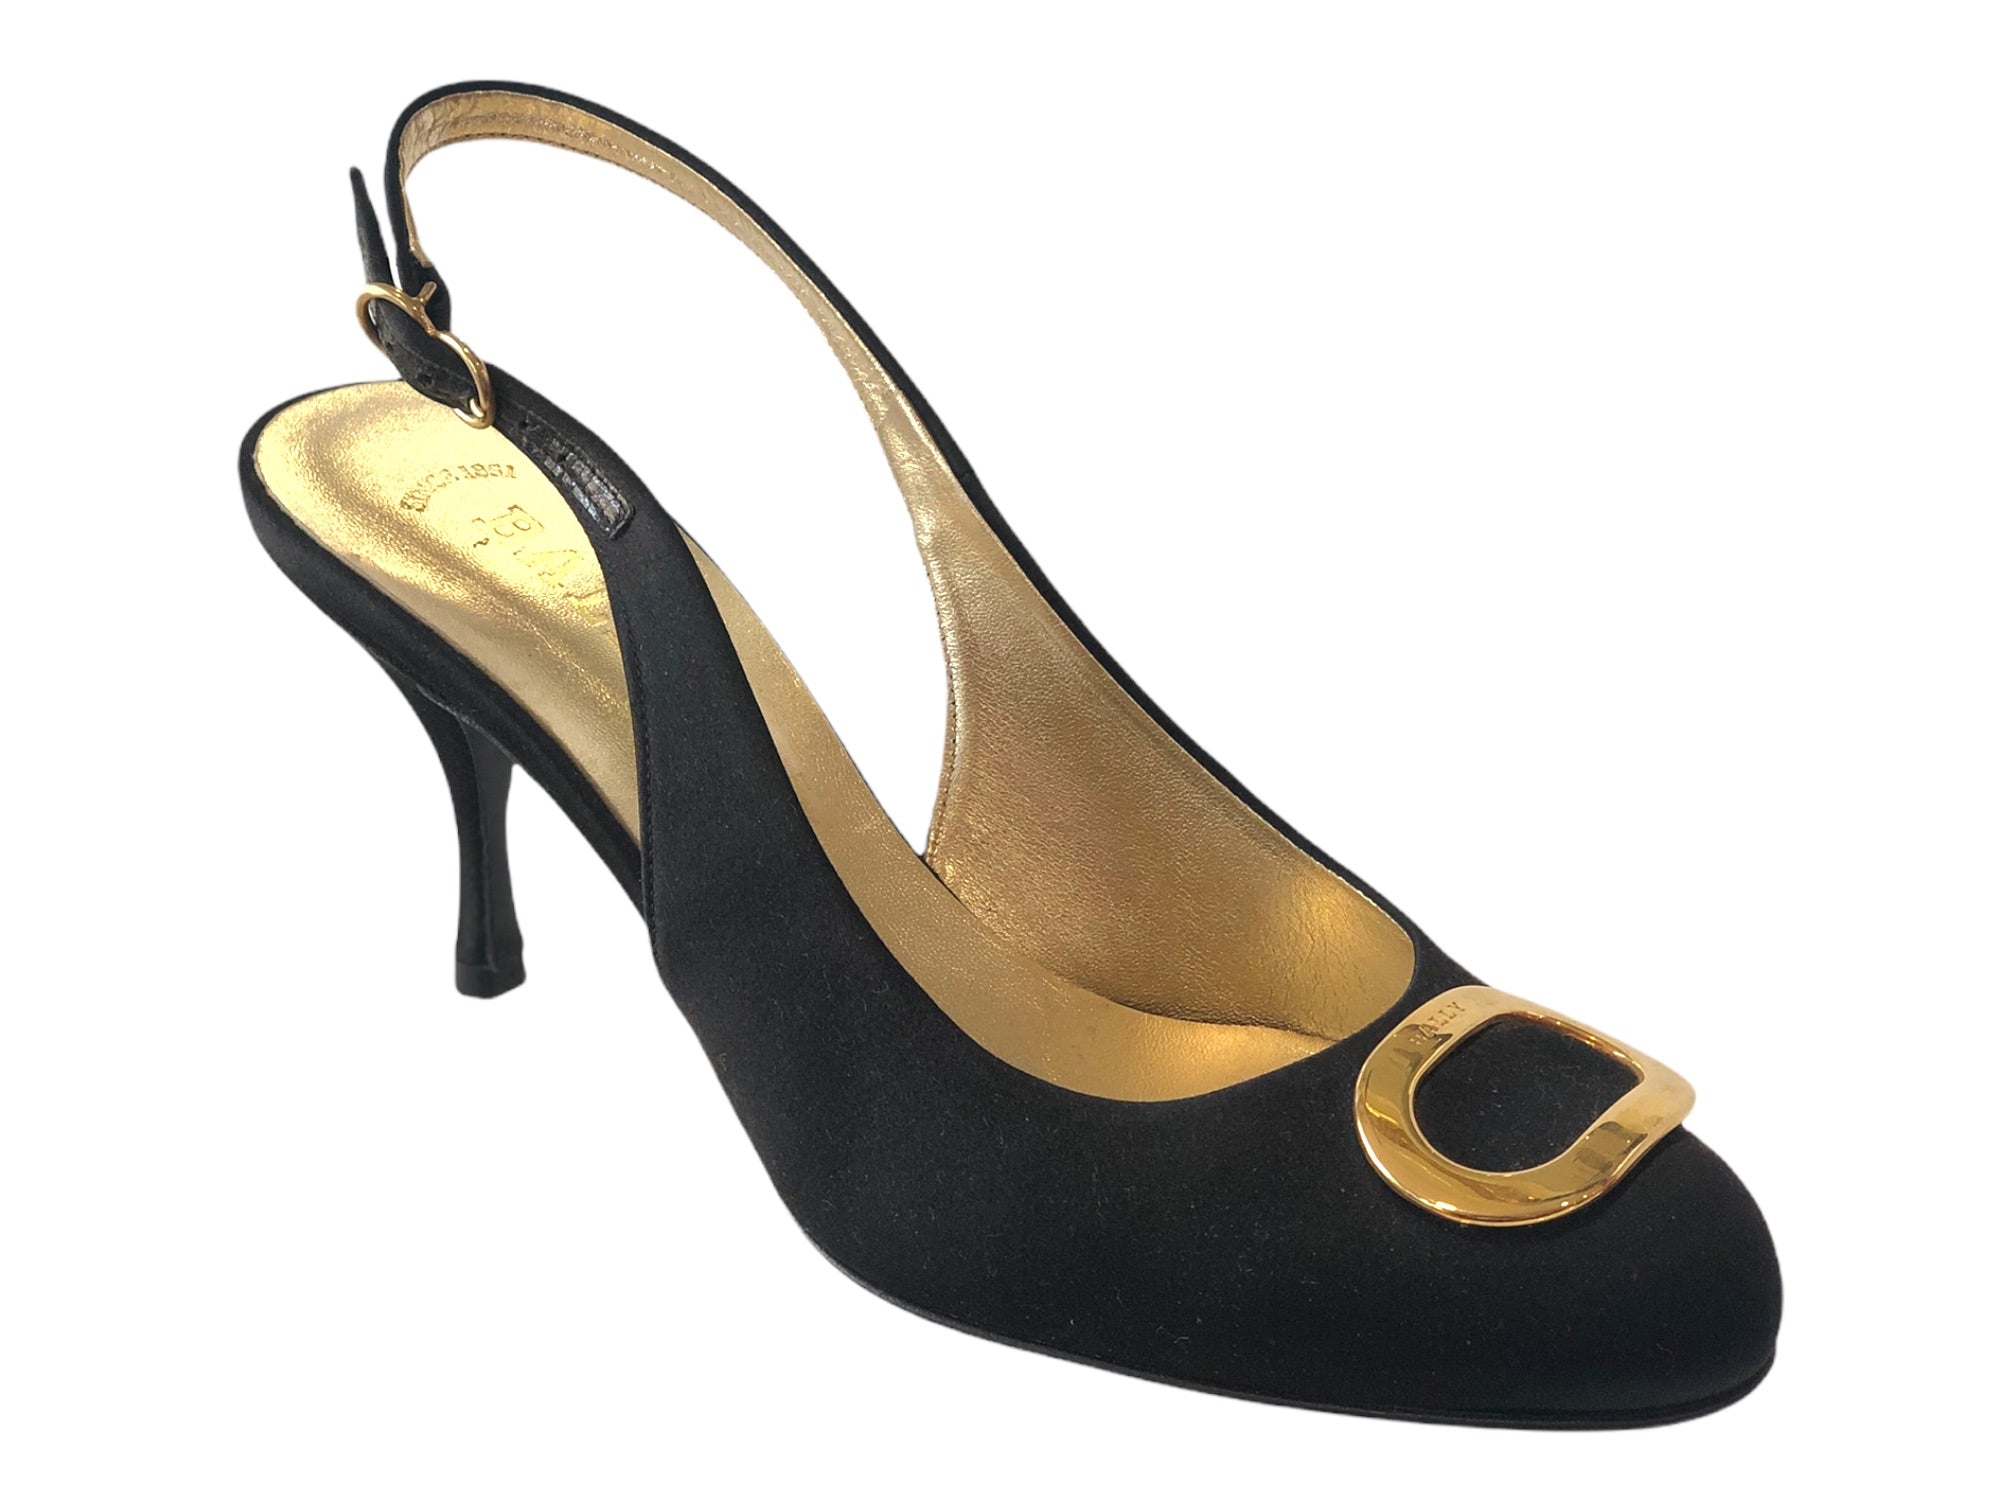 Bally Women's Slingback Black Gold Accent Made in Italy Heels Size 9 | eBay